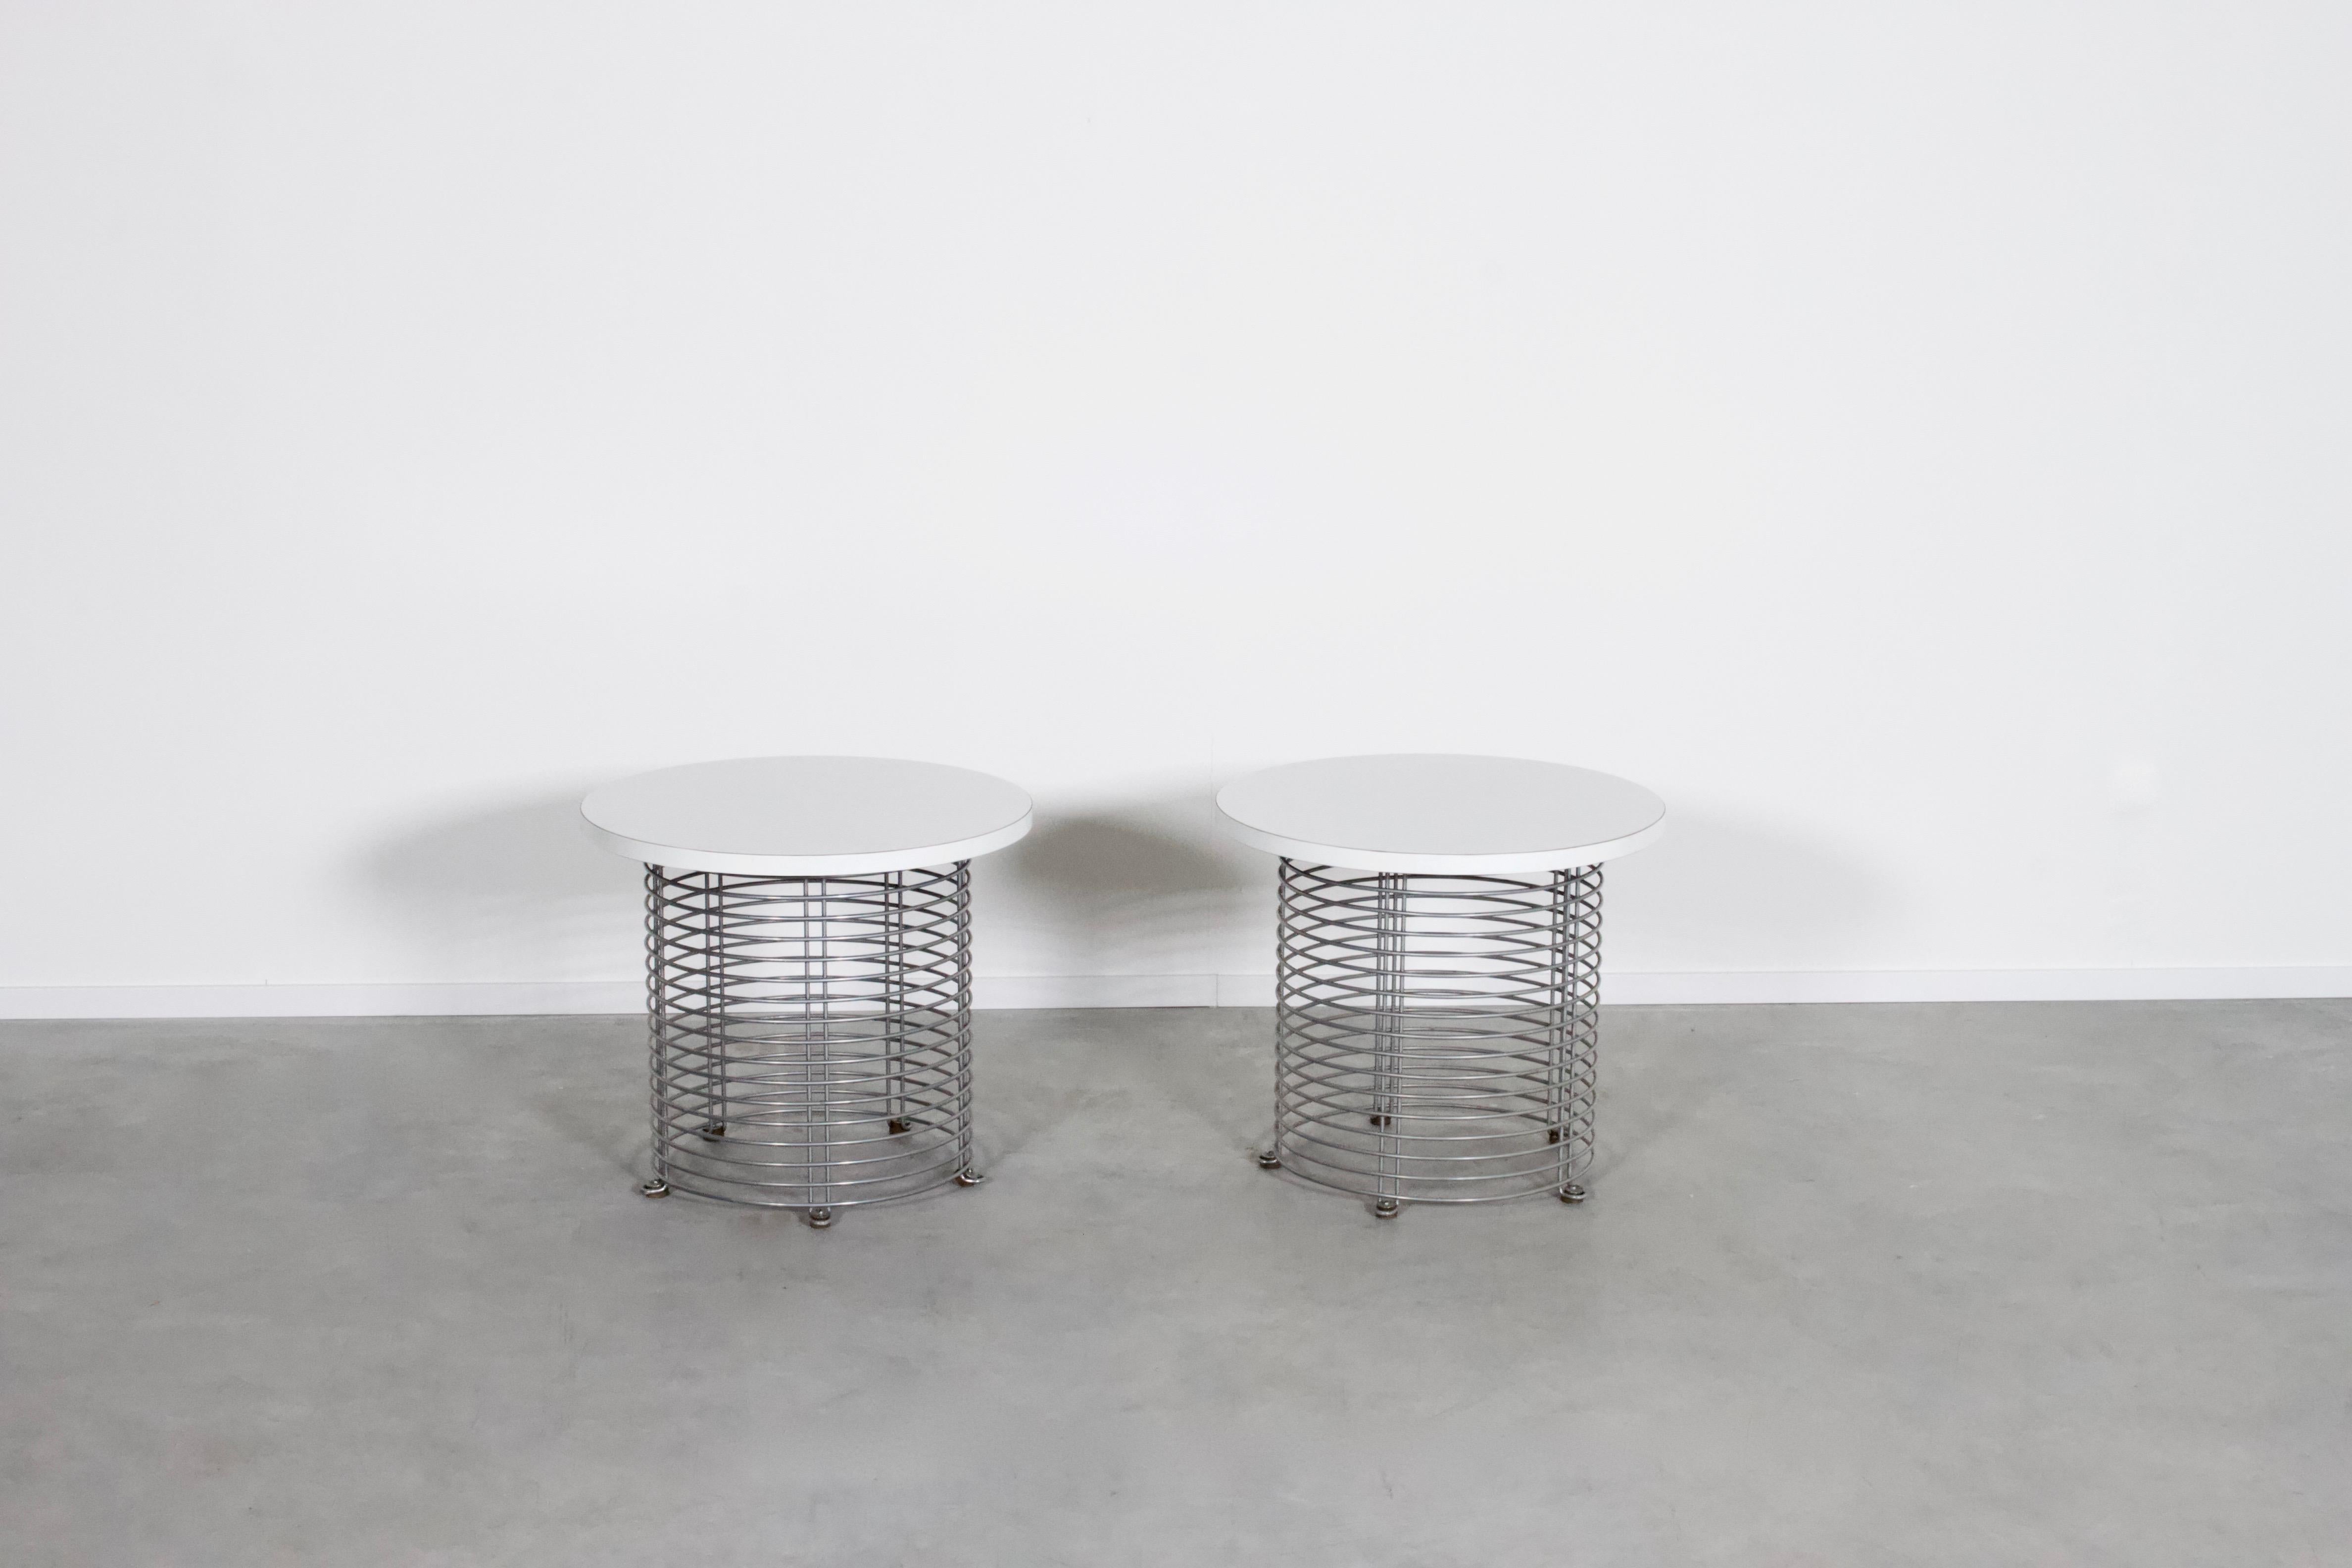 Set of 2 Pantonova end/coffee tables in very good condition.

Designed by Verner Panton in 1971. 

Produced by Fritz Hansen, Denmark

The tables consist of parallel chromed wire rods and a white Formica top.

The Pantonova series were designed and